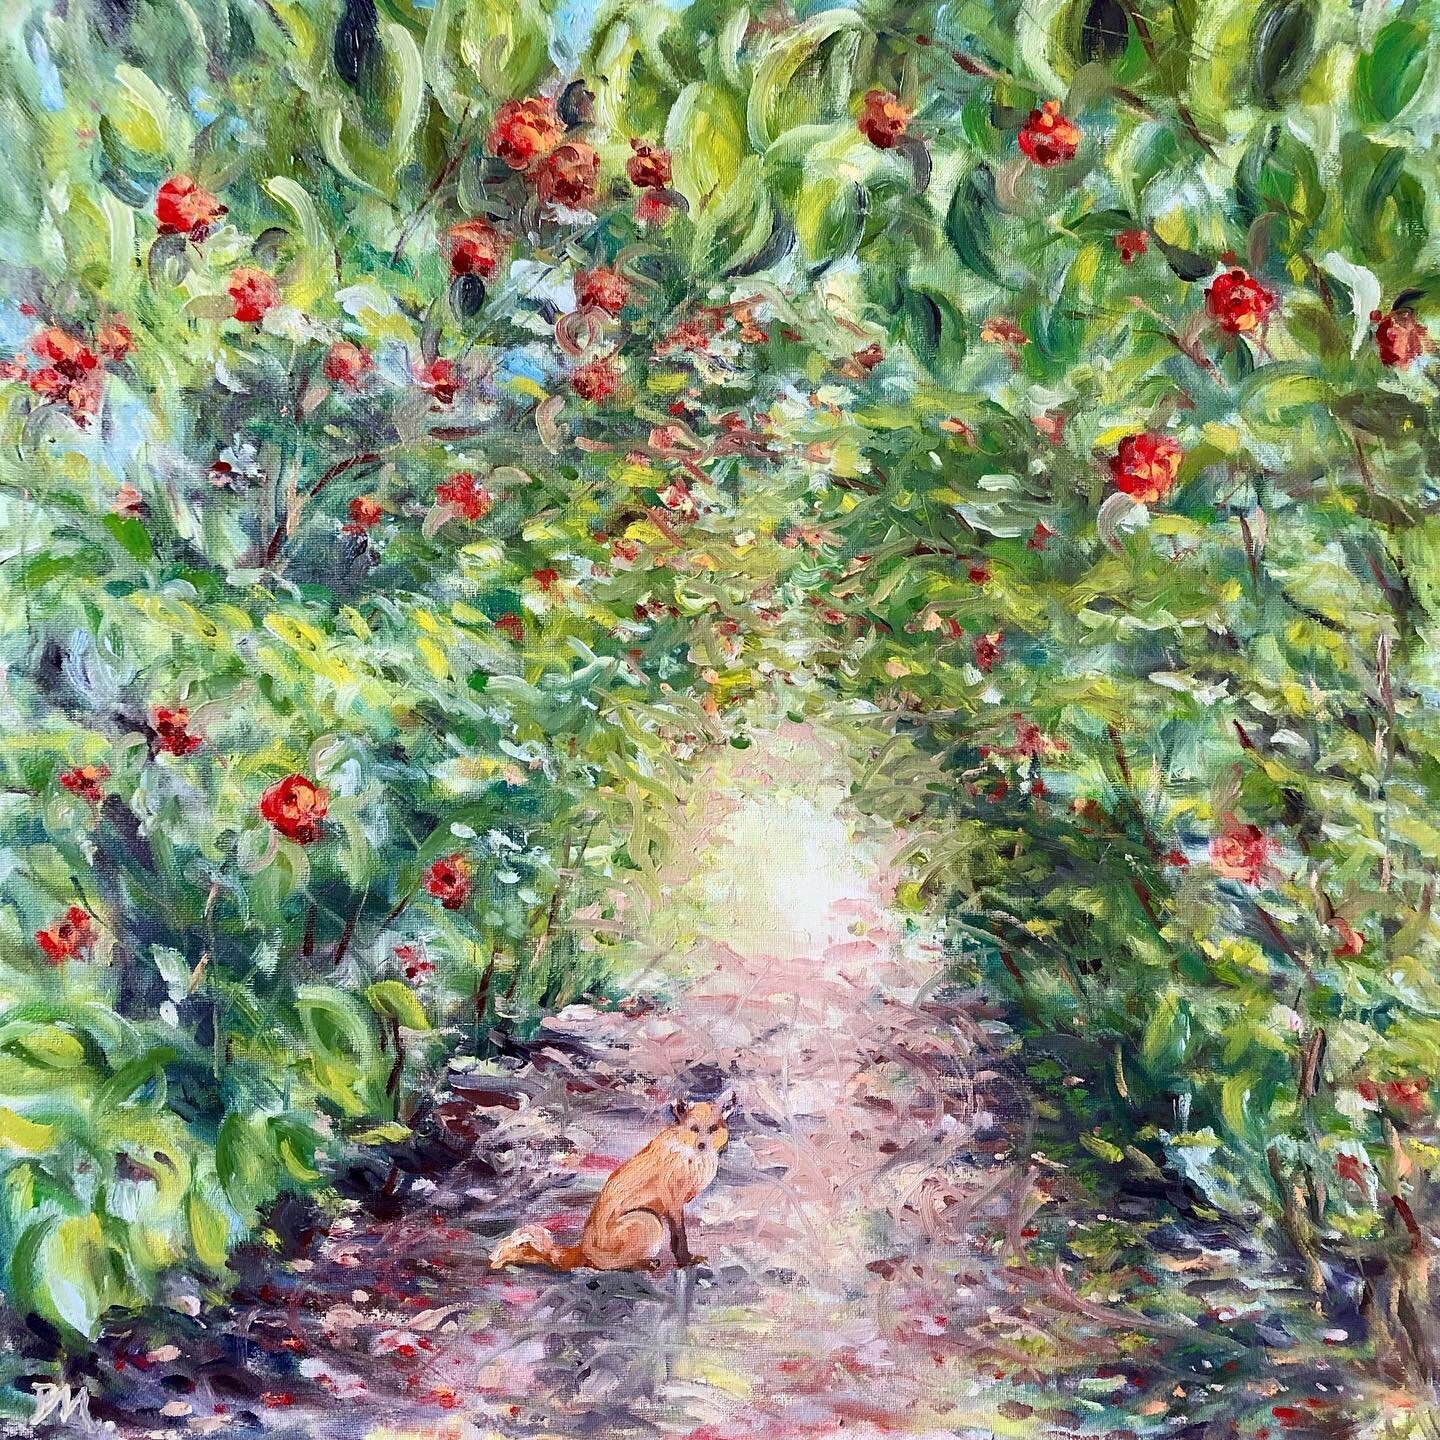 &ldquo;Magic Tunnel&rdquo; oil on canvas 60x60 cm by @doinamoss based on the amazing light tunnel of camellias in Bushy Park, resident fox 🦊 included! Still wet on the easel but published on the gallery website.  https://www.leighpicturegallery.co.u